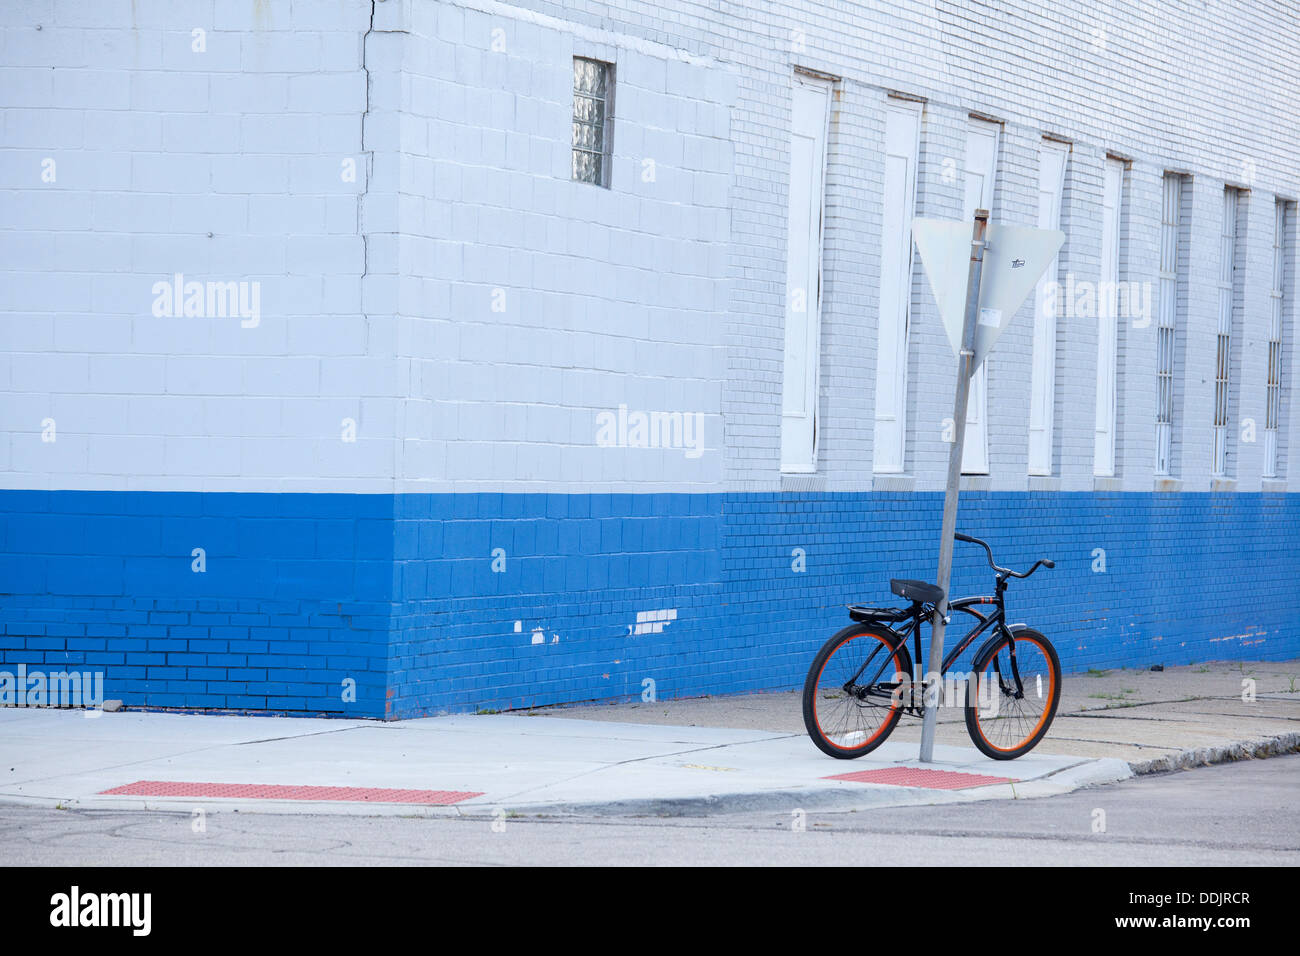 Detroit, Michigan - A bicycle parked on a street corner. Stock Photo